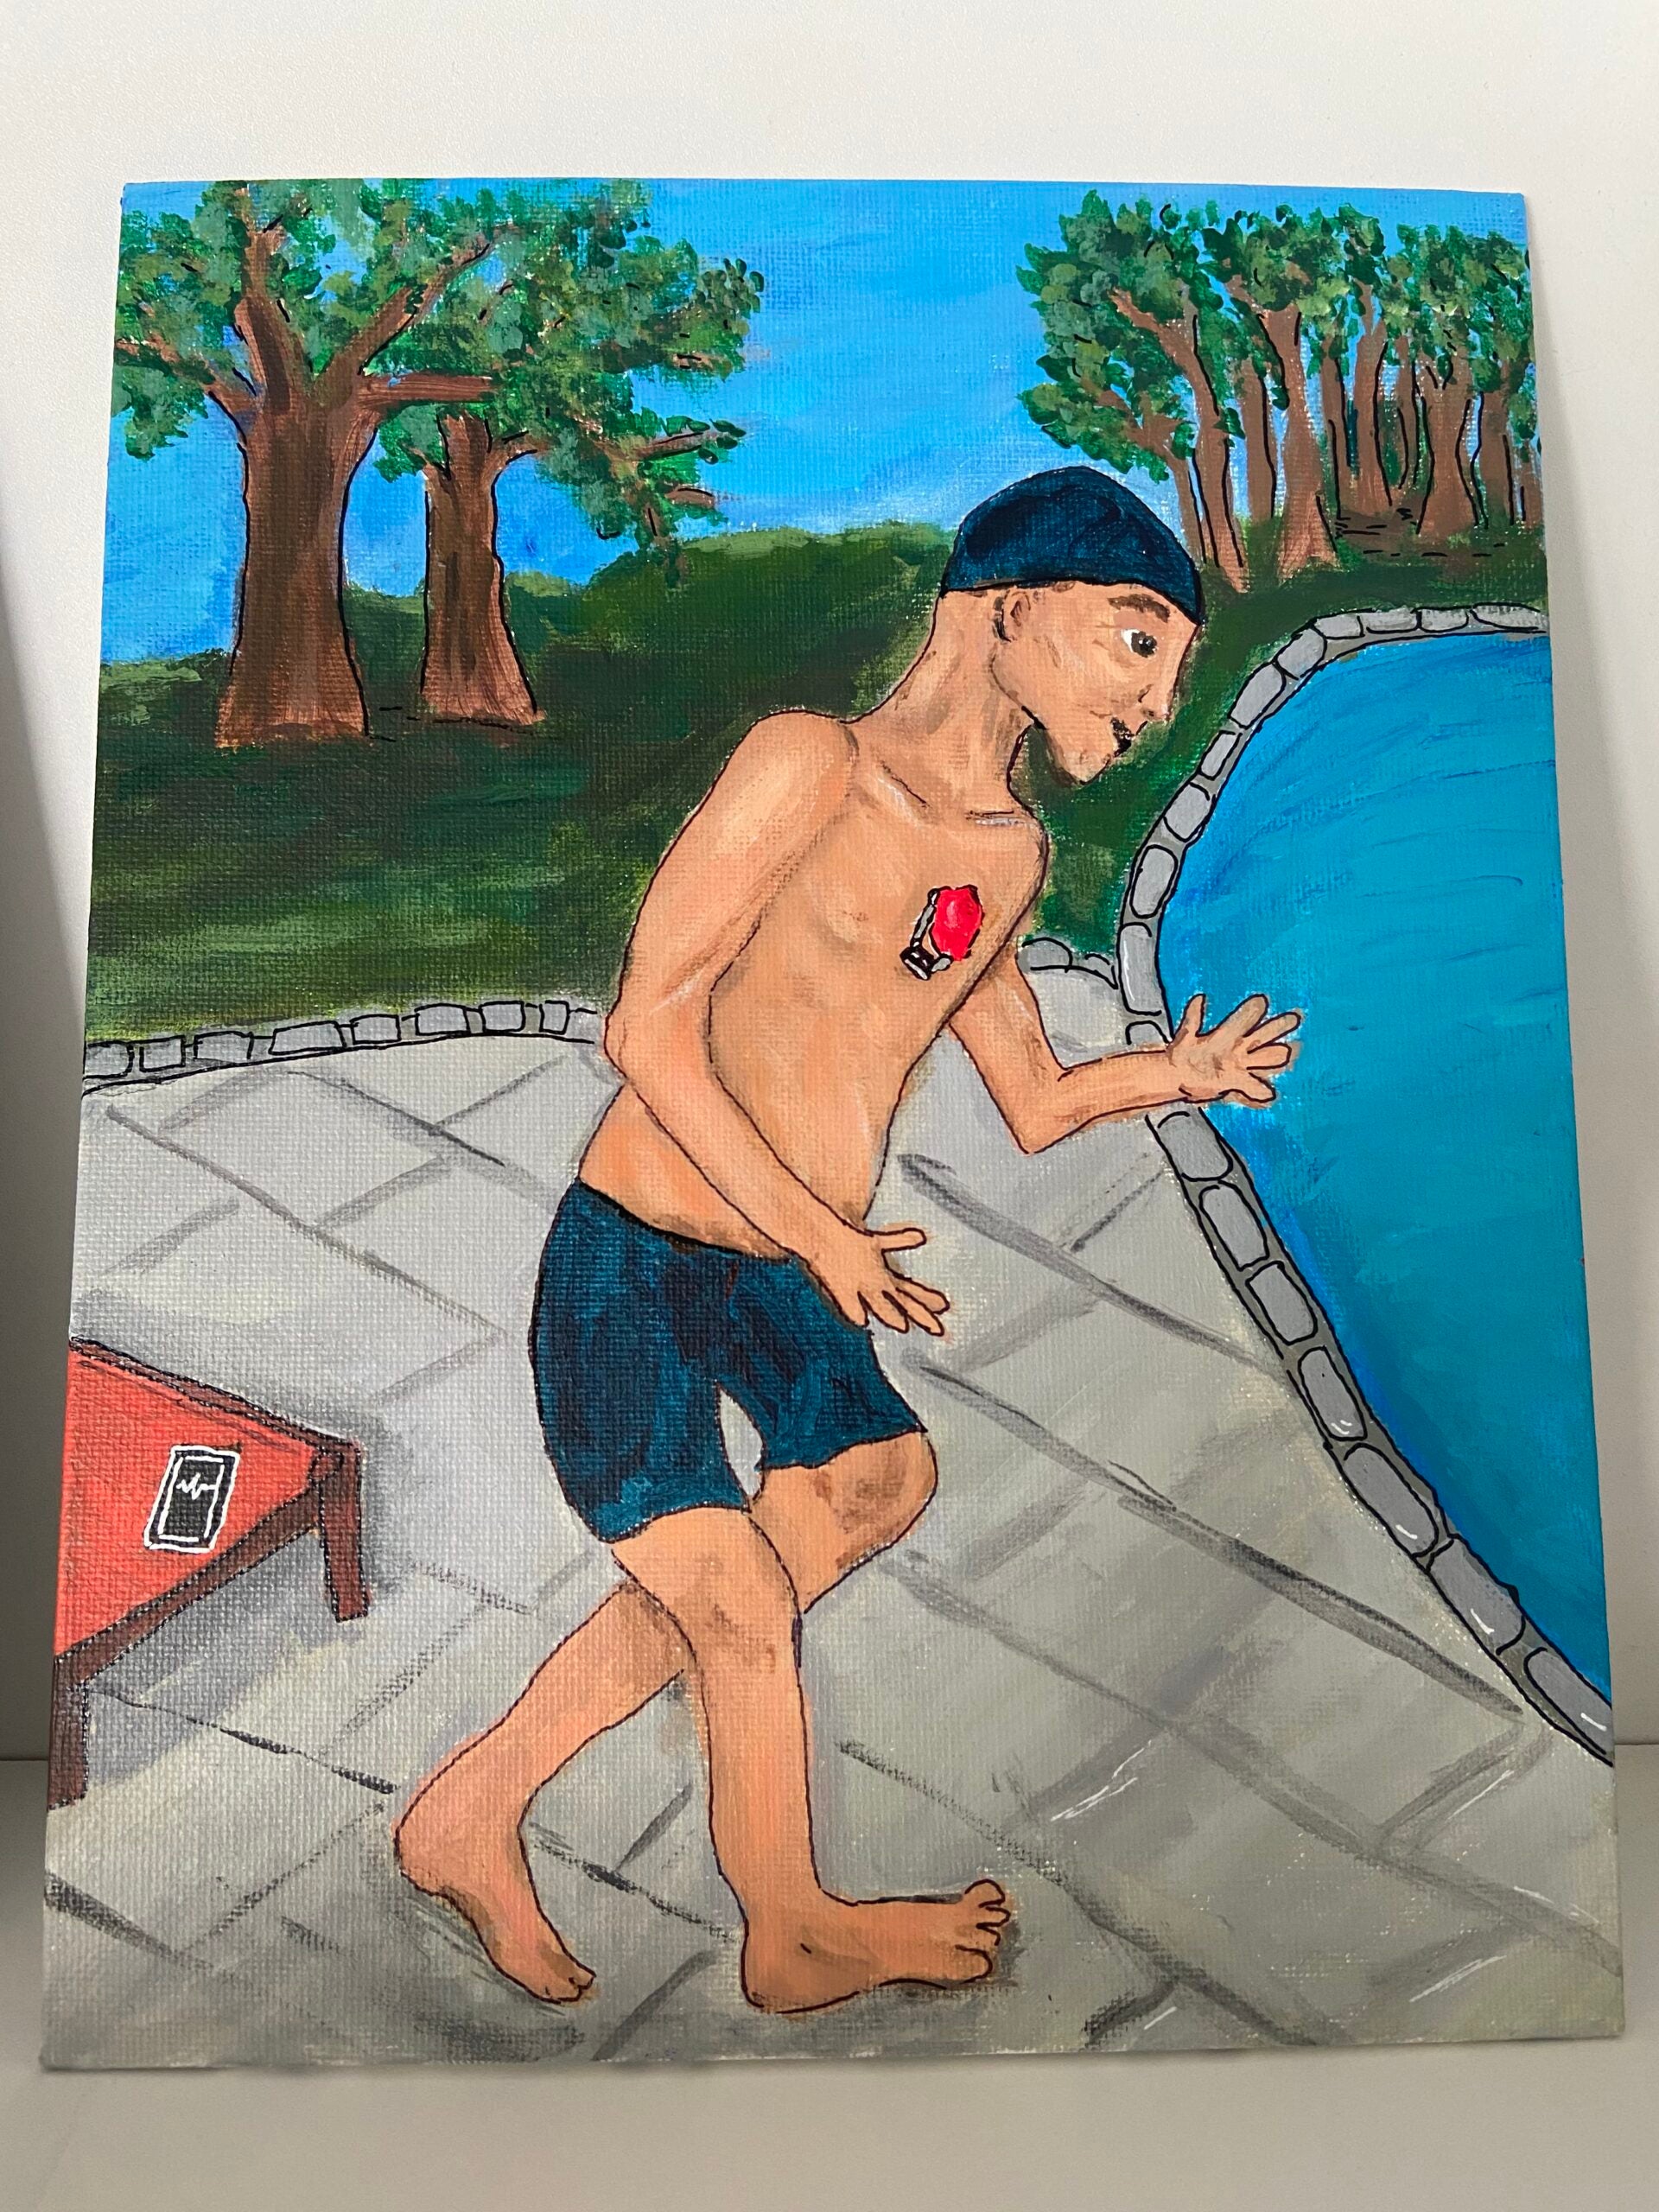 Painting of a man wearing a swimsuit and swim cap, standing next to a pool. Behind him, there are trees and a blue sky. His heart is visible on top of his skin, it is connected to a very small wire that surrounds it, maybe a pacemaker.